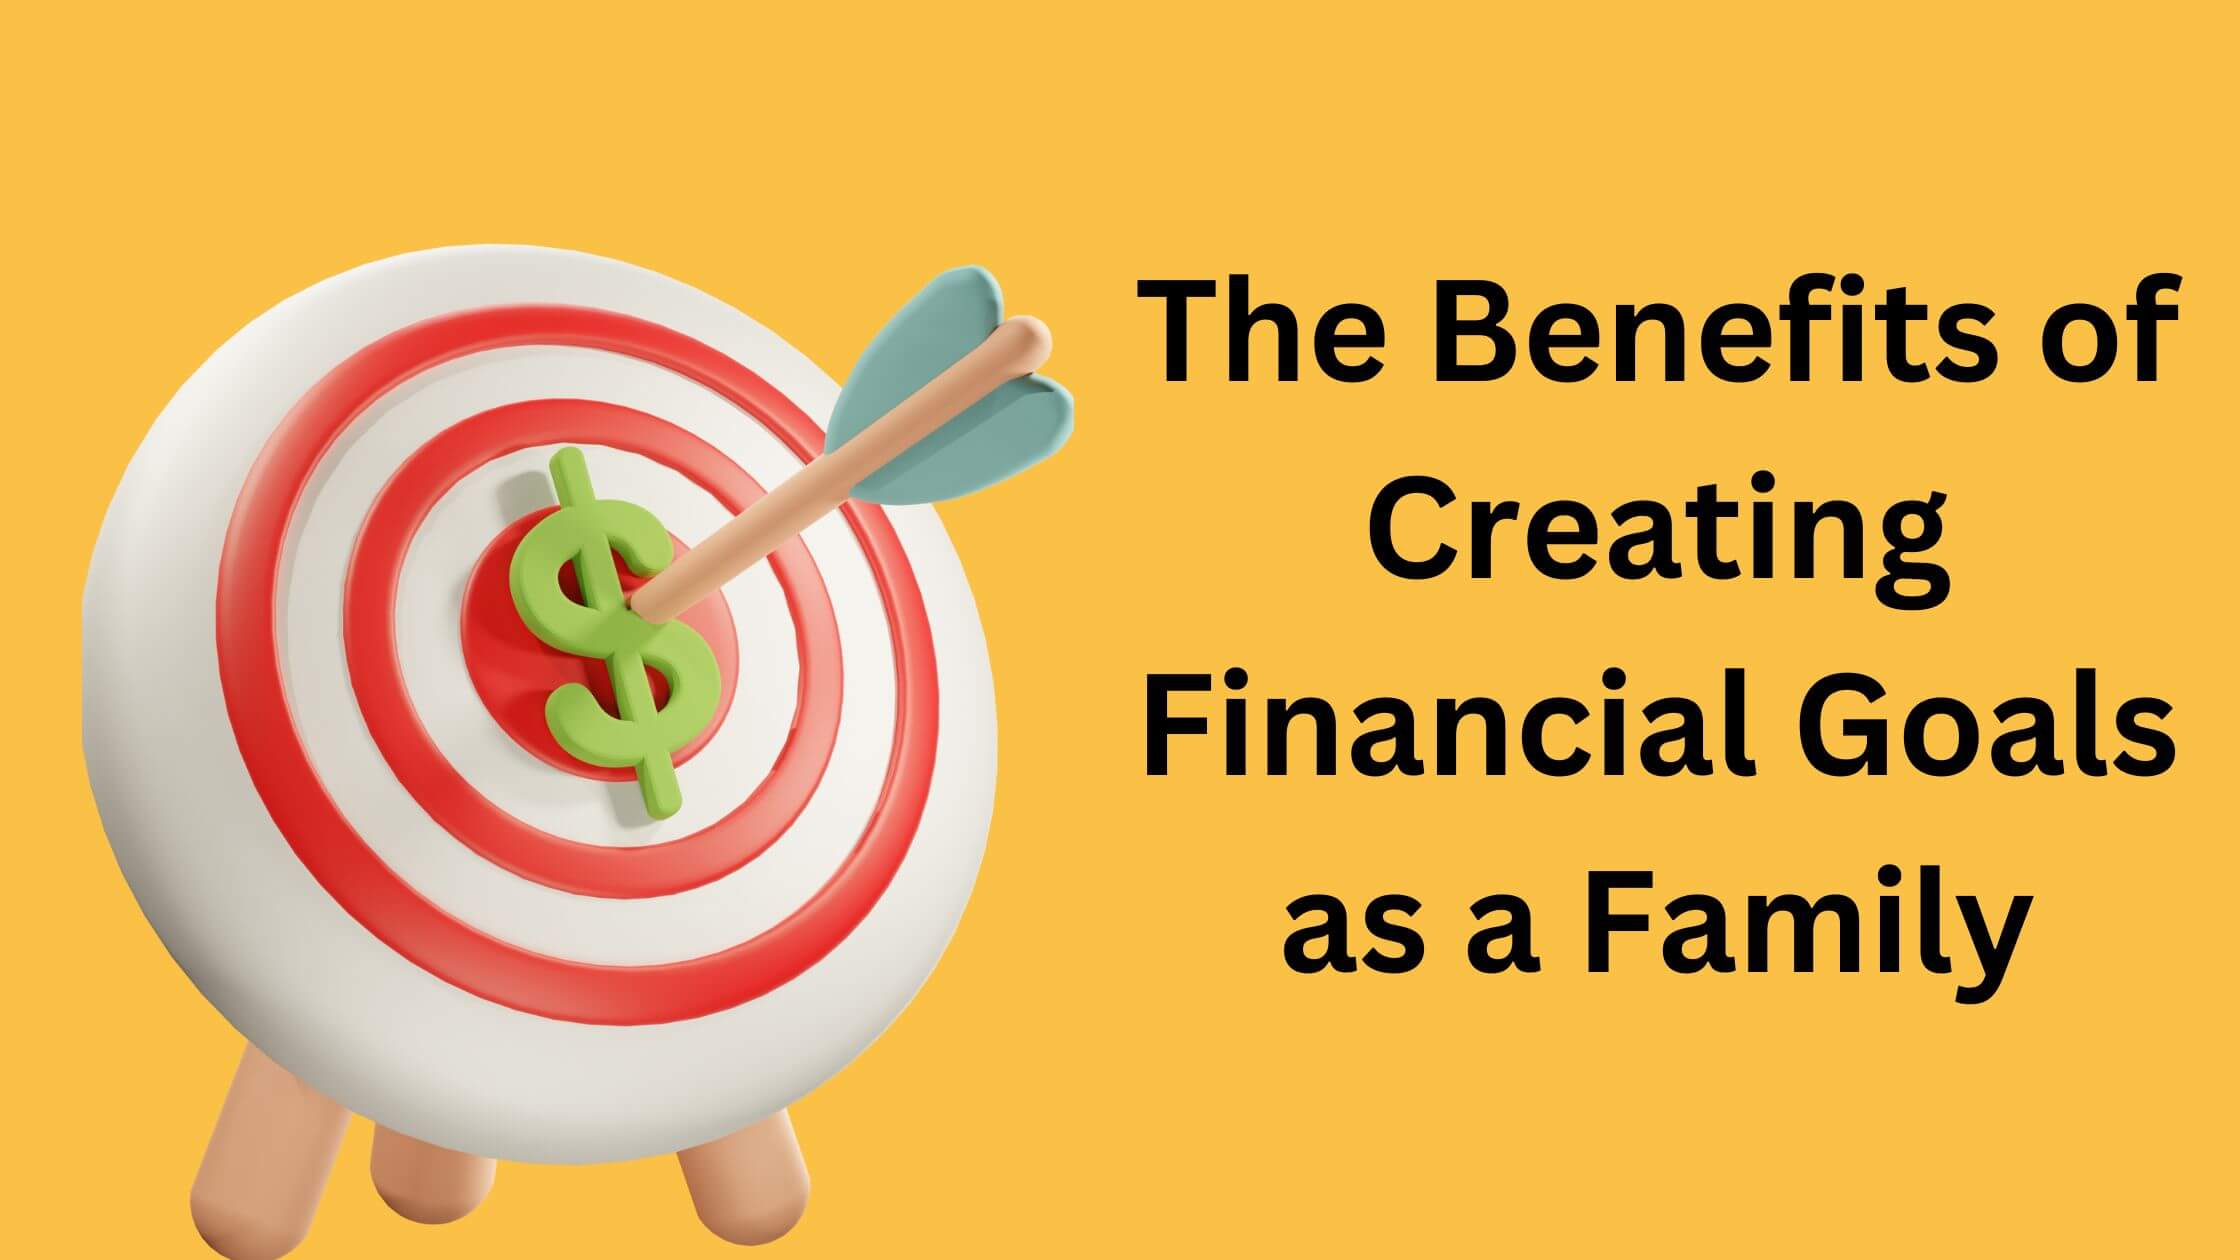 Importance of Creating Financial Goals as a Family